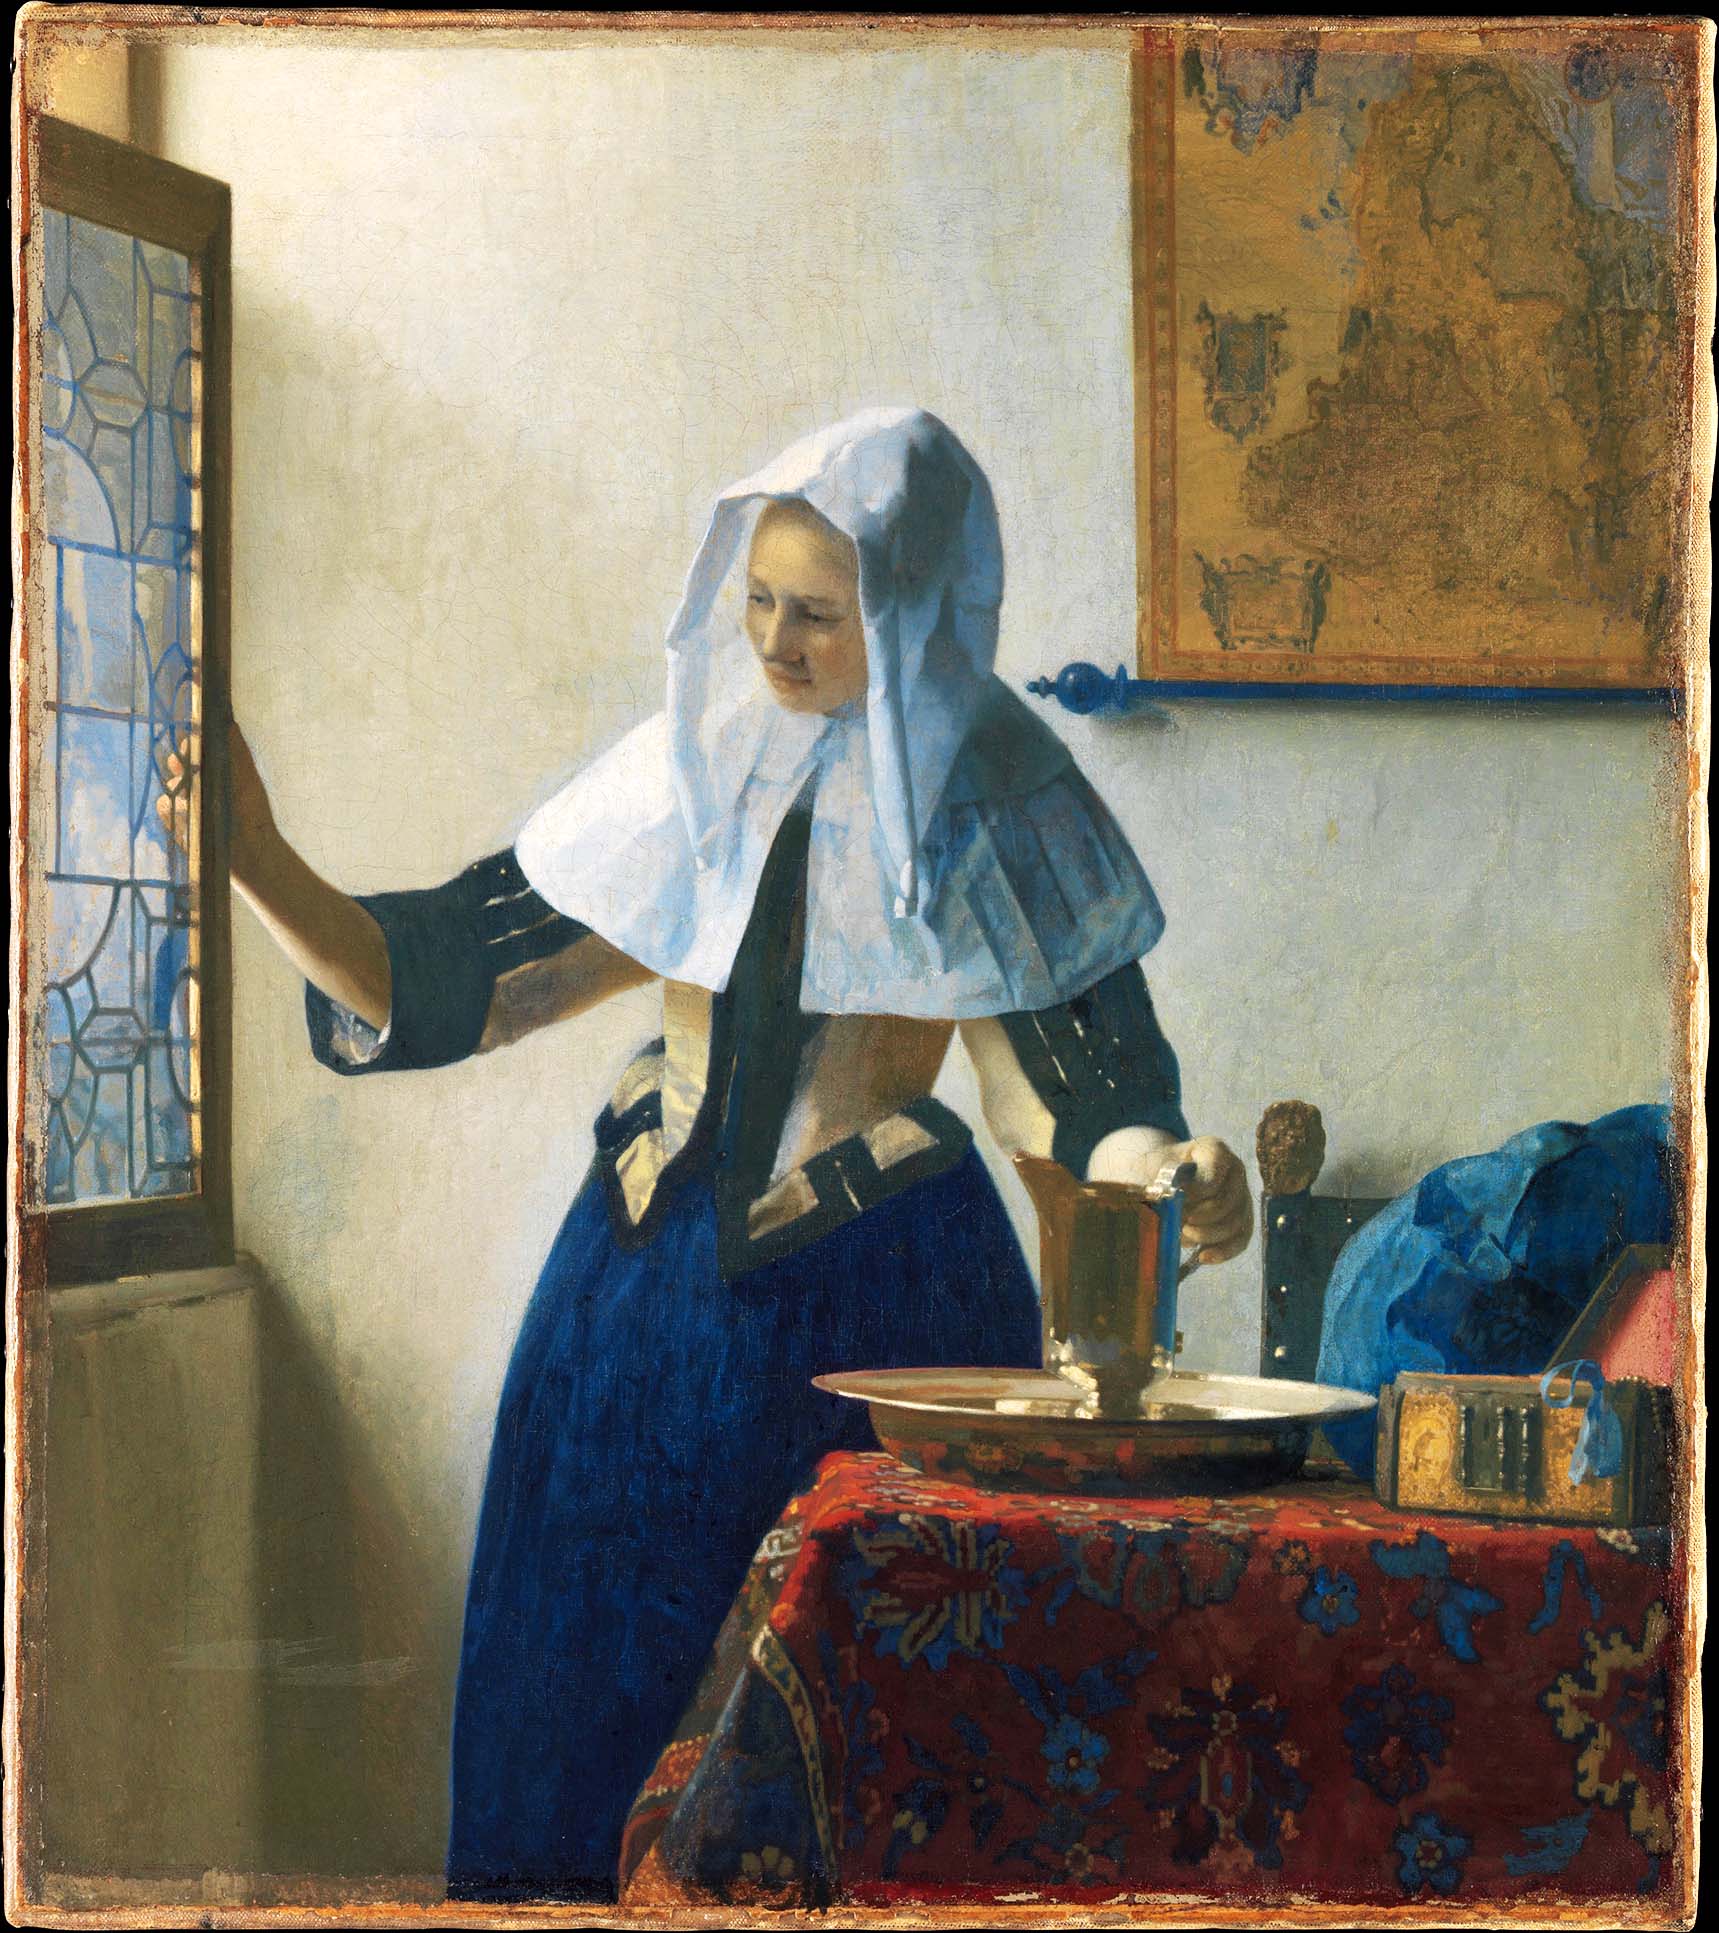 The original Young Woman with a Water Pitcher by Johannes Vermeer